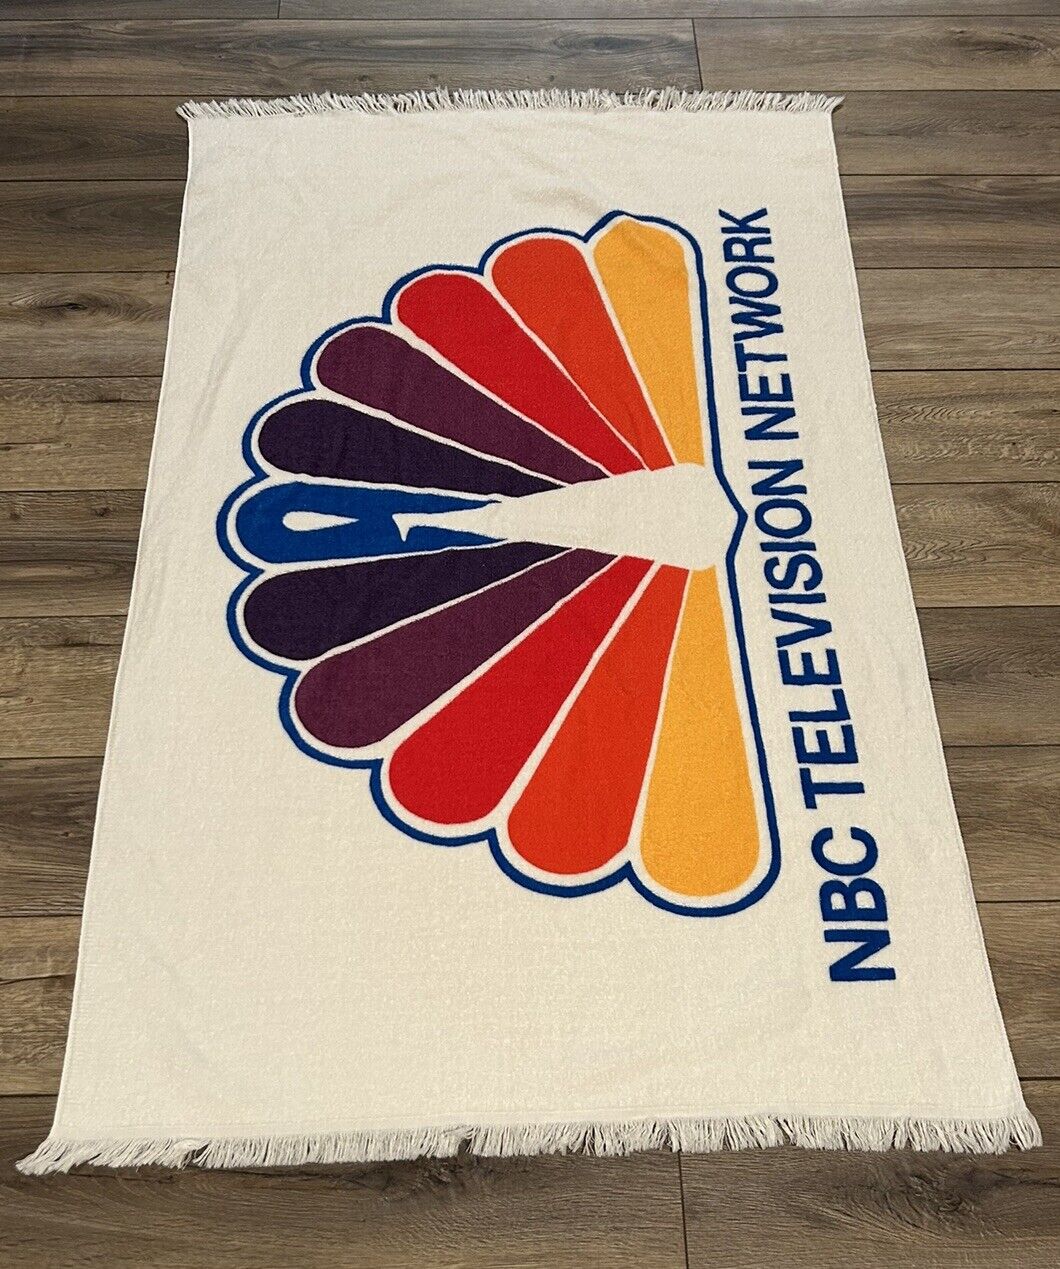 Vintage 1970’s NBC Television Network Peacock  Fringed Beach Towel 57x37